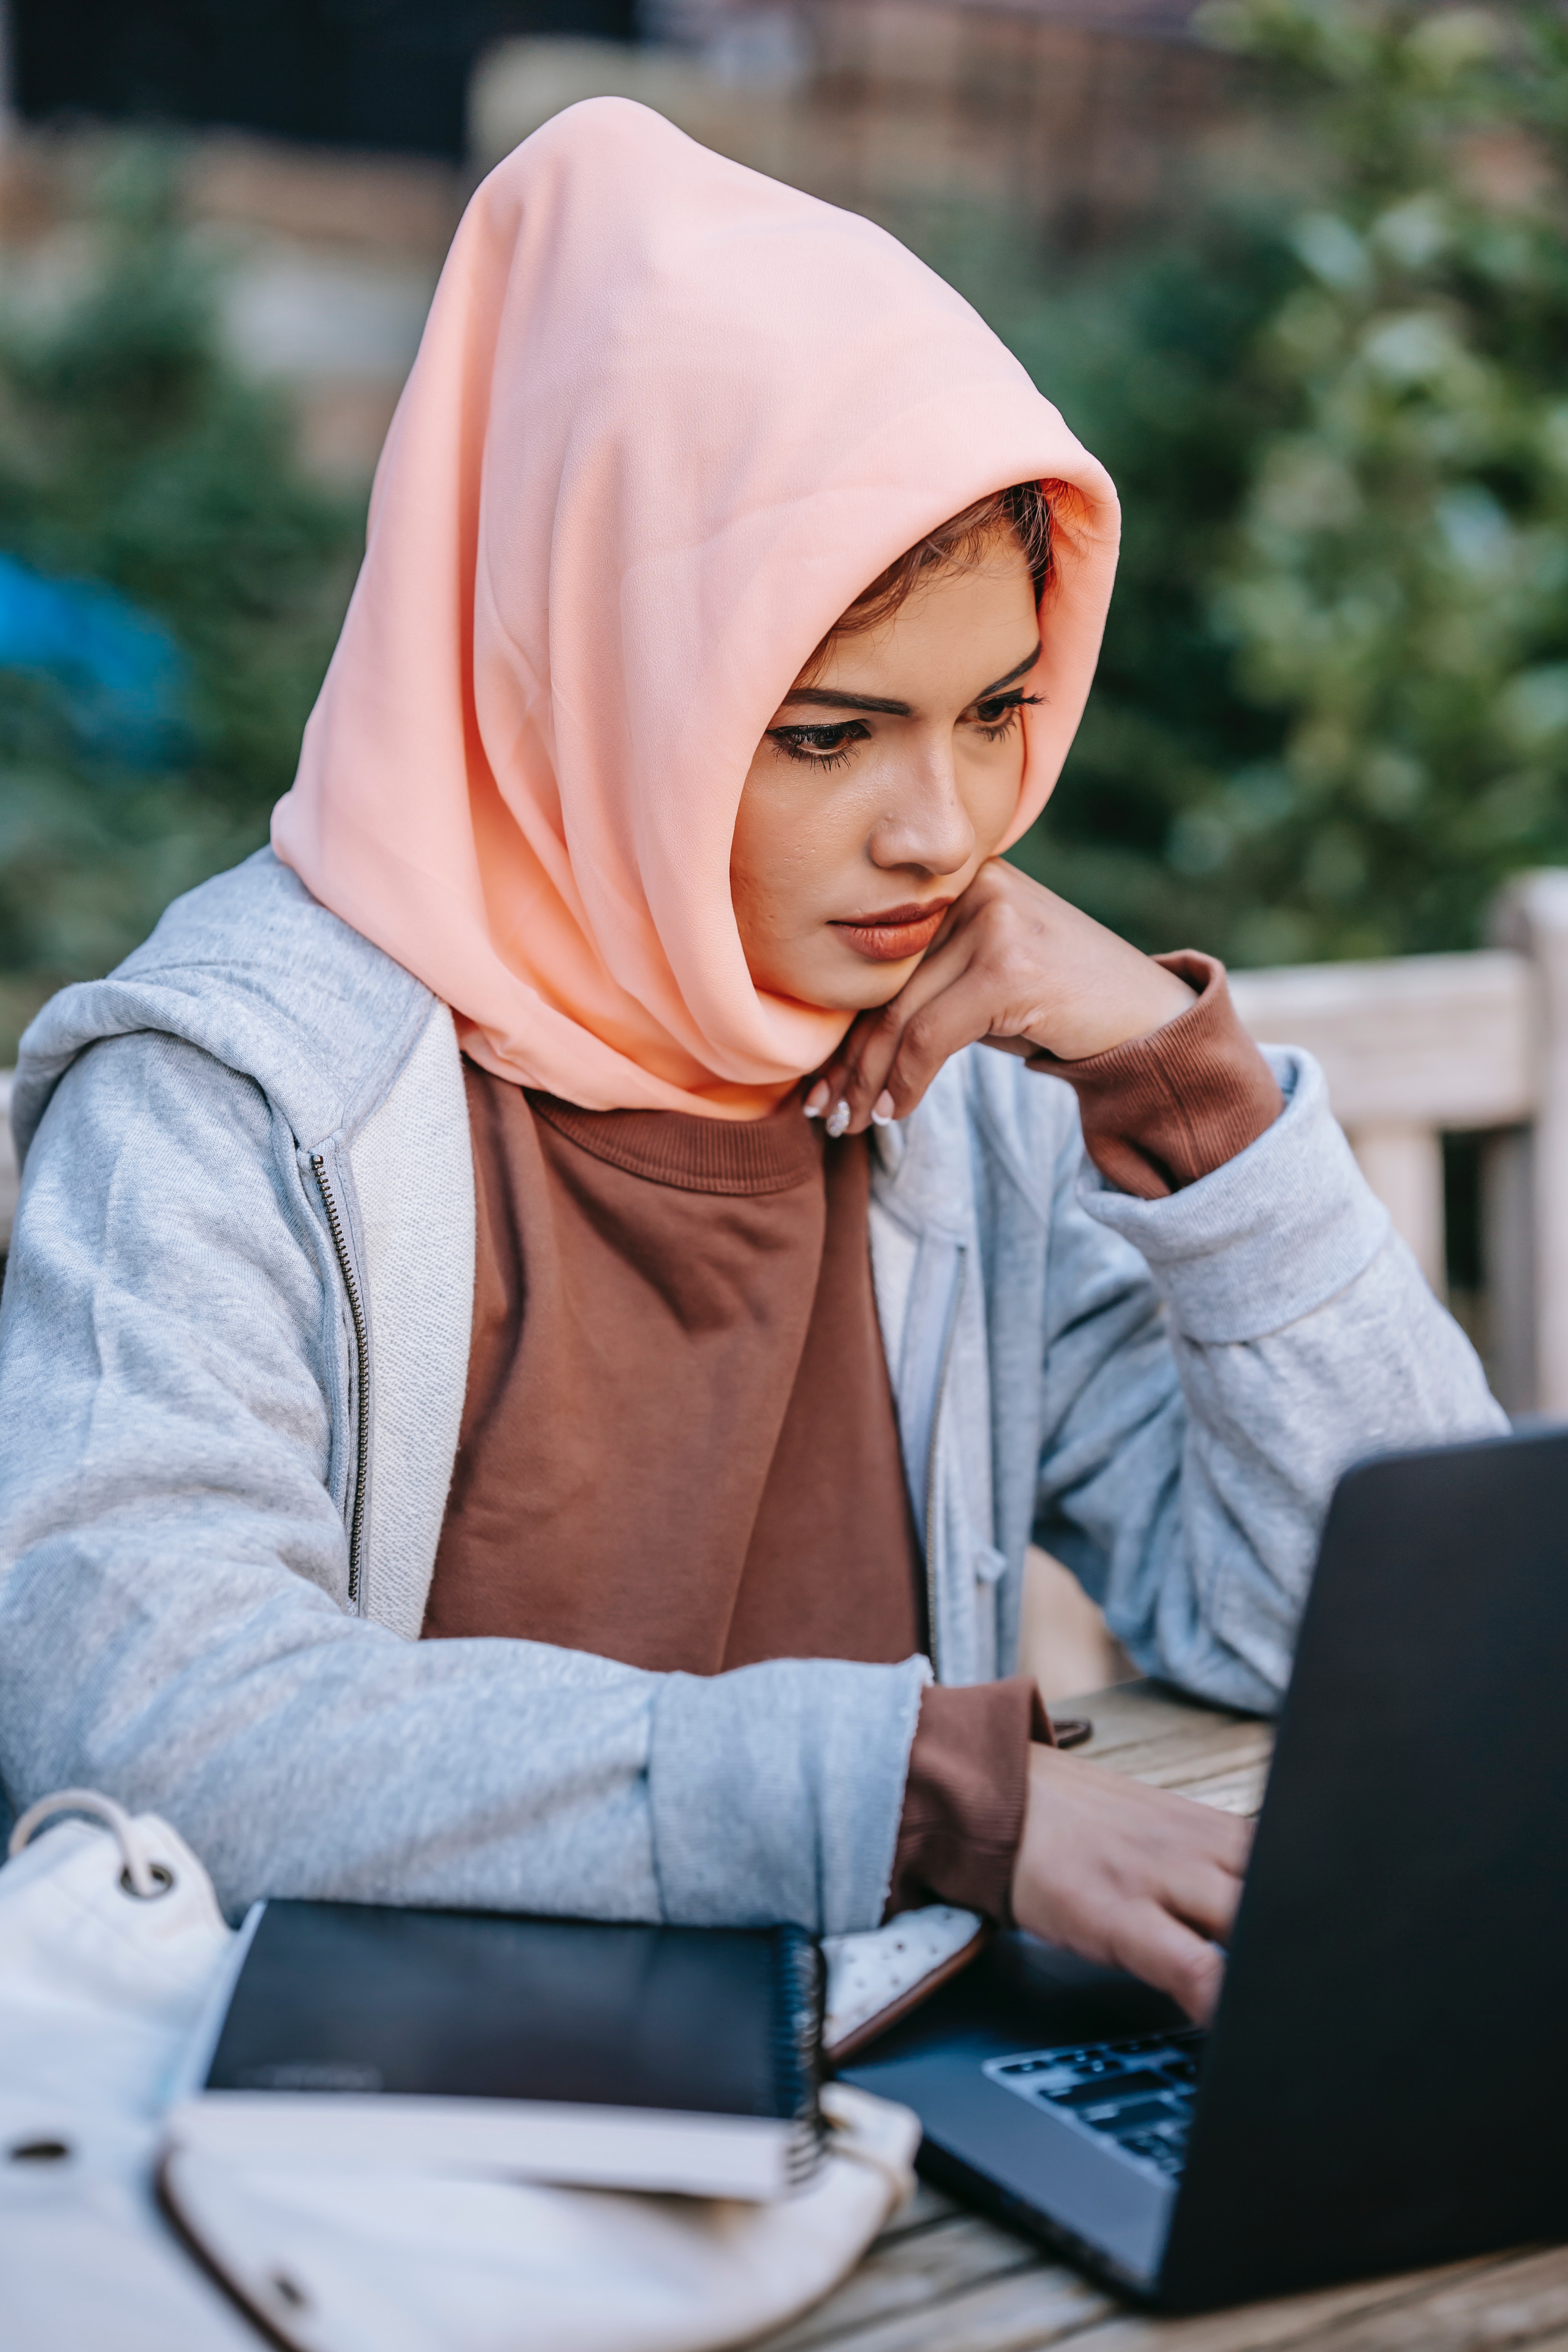 A serious young woman wearing a headscarf, looking at a computer screen and typing at an outdoor table.